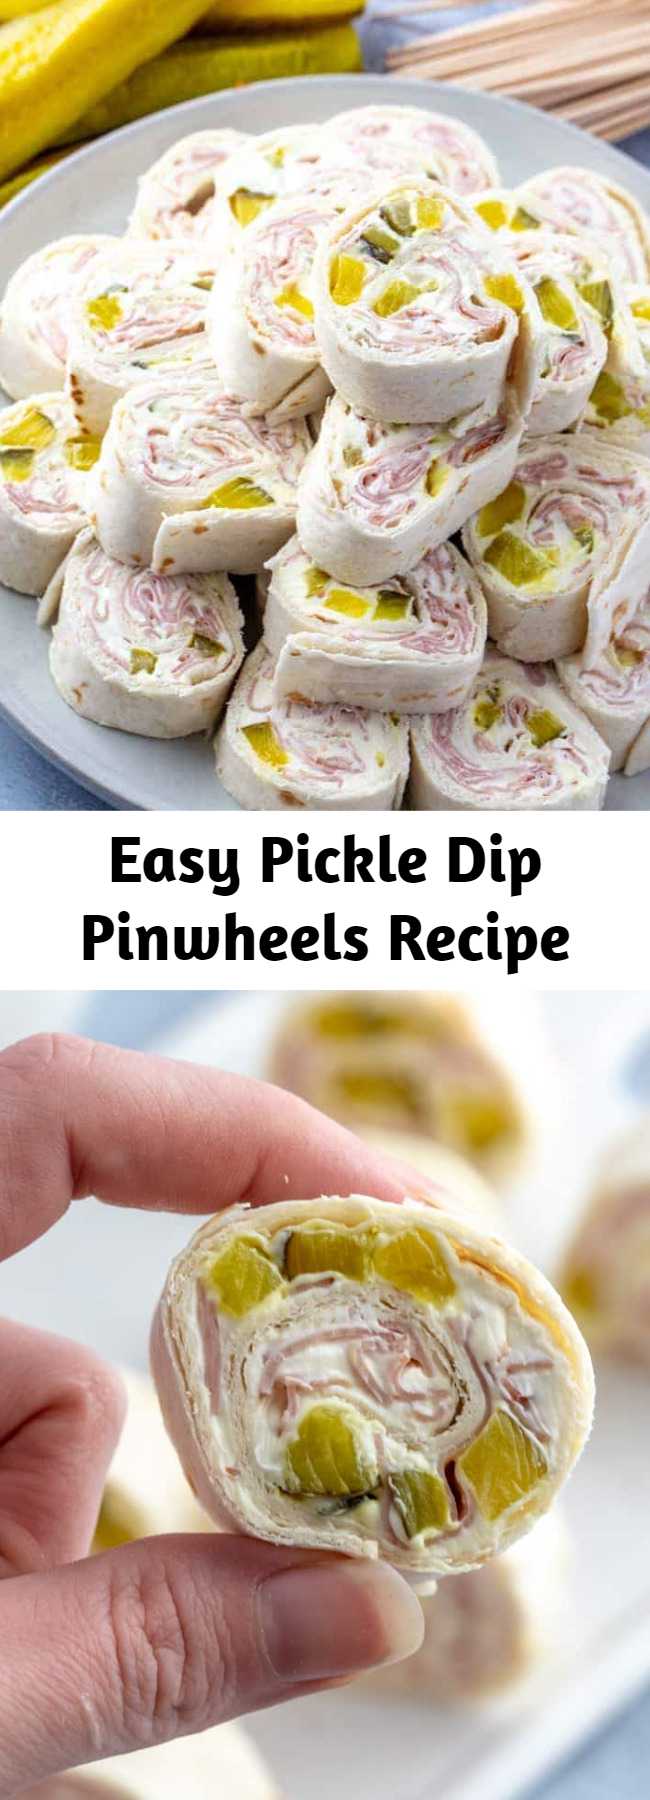 Easy Pickle Dip Pinwheels Recipe - Creamy, crunchy and full of flavor these Pickle Dip Pinwheels are full of cream cheese, sliced ham and diced pickles. The perfect party appetizer. #appetizer #pickles #pinwheels #partyfood #easyrecipe